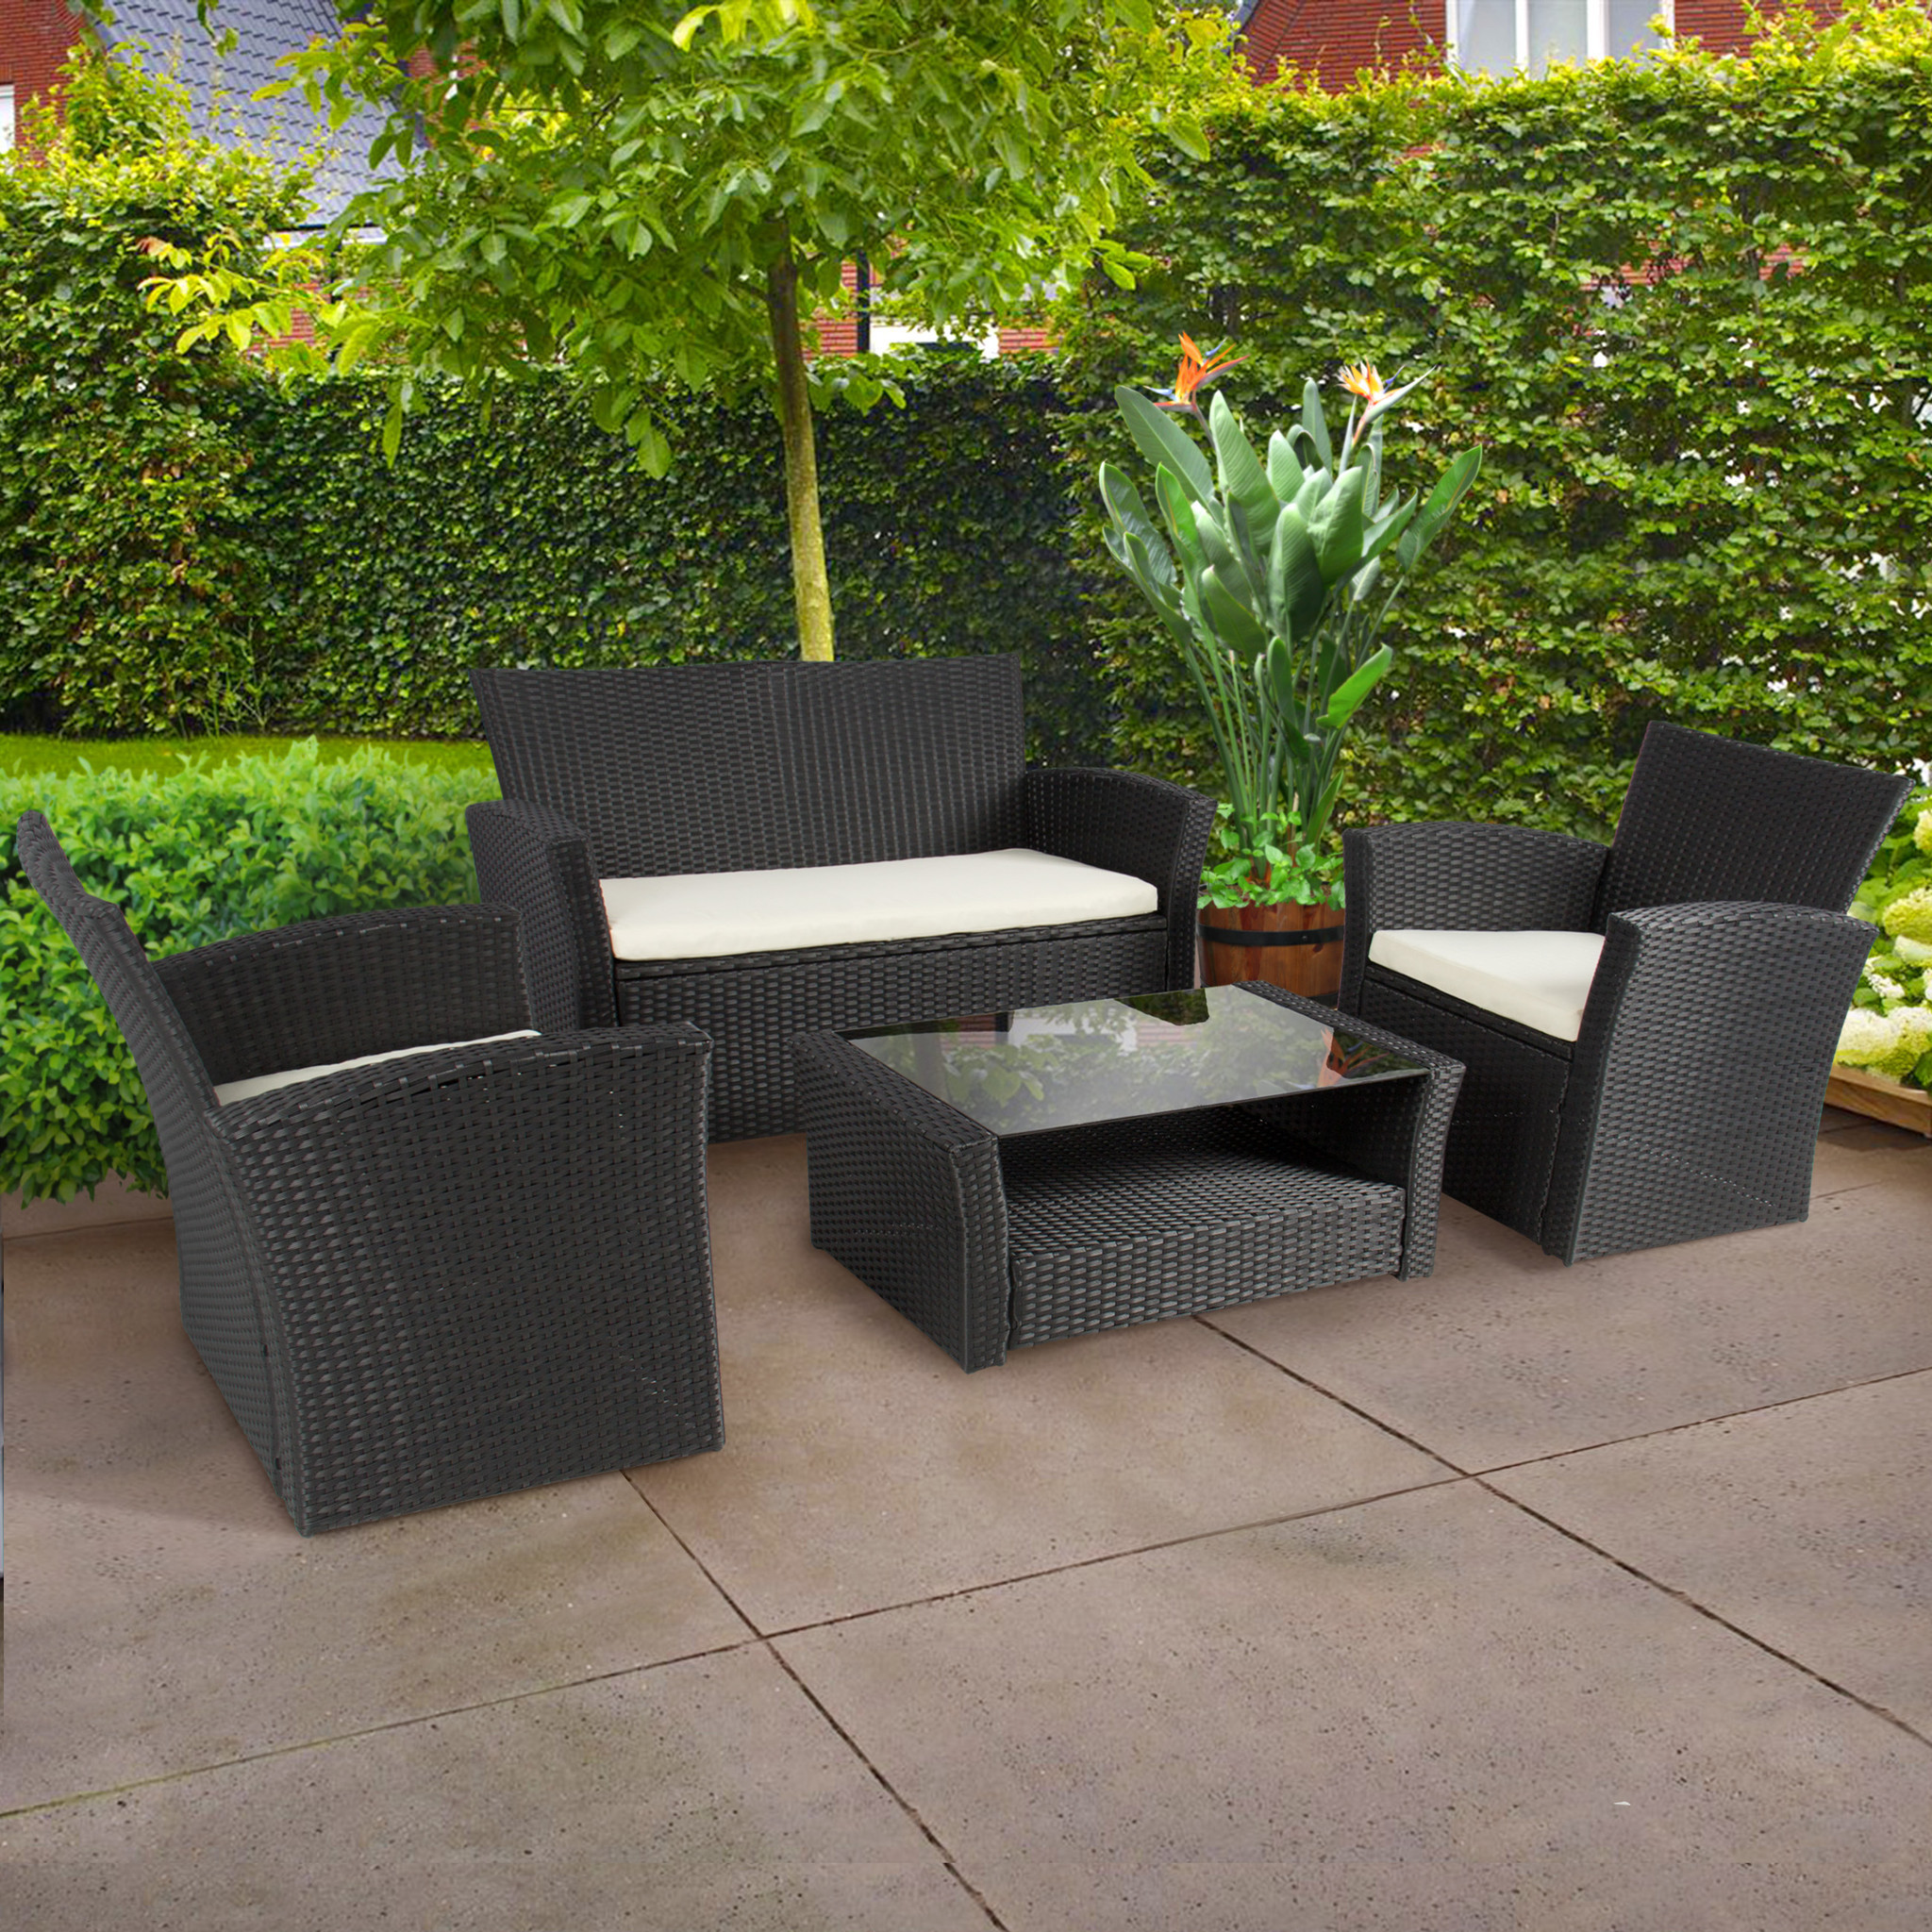 Backyard Furniture Sets
 HOW TO SELECT THE BEST QUALITY PATIO FURNITURE FOR YOUR HOME